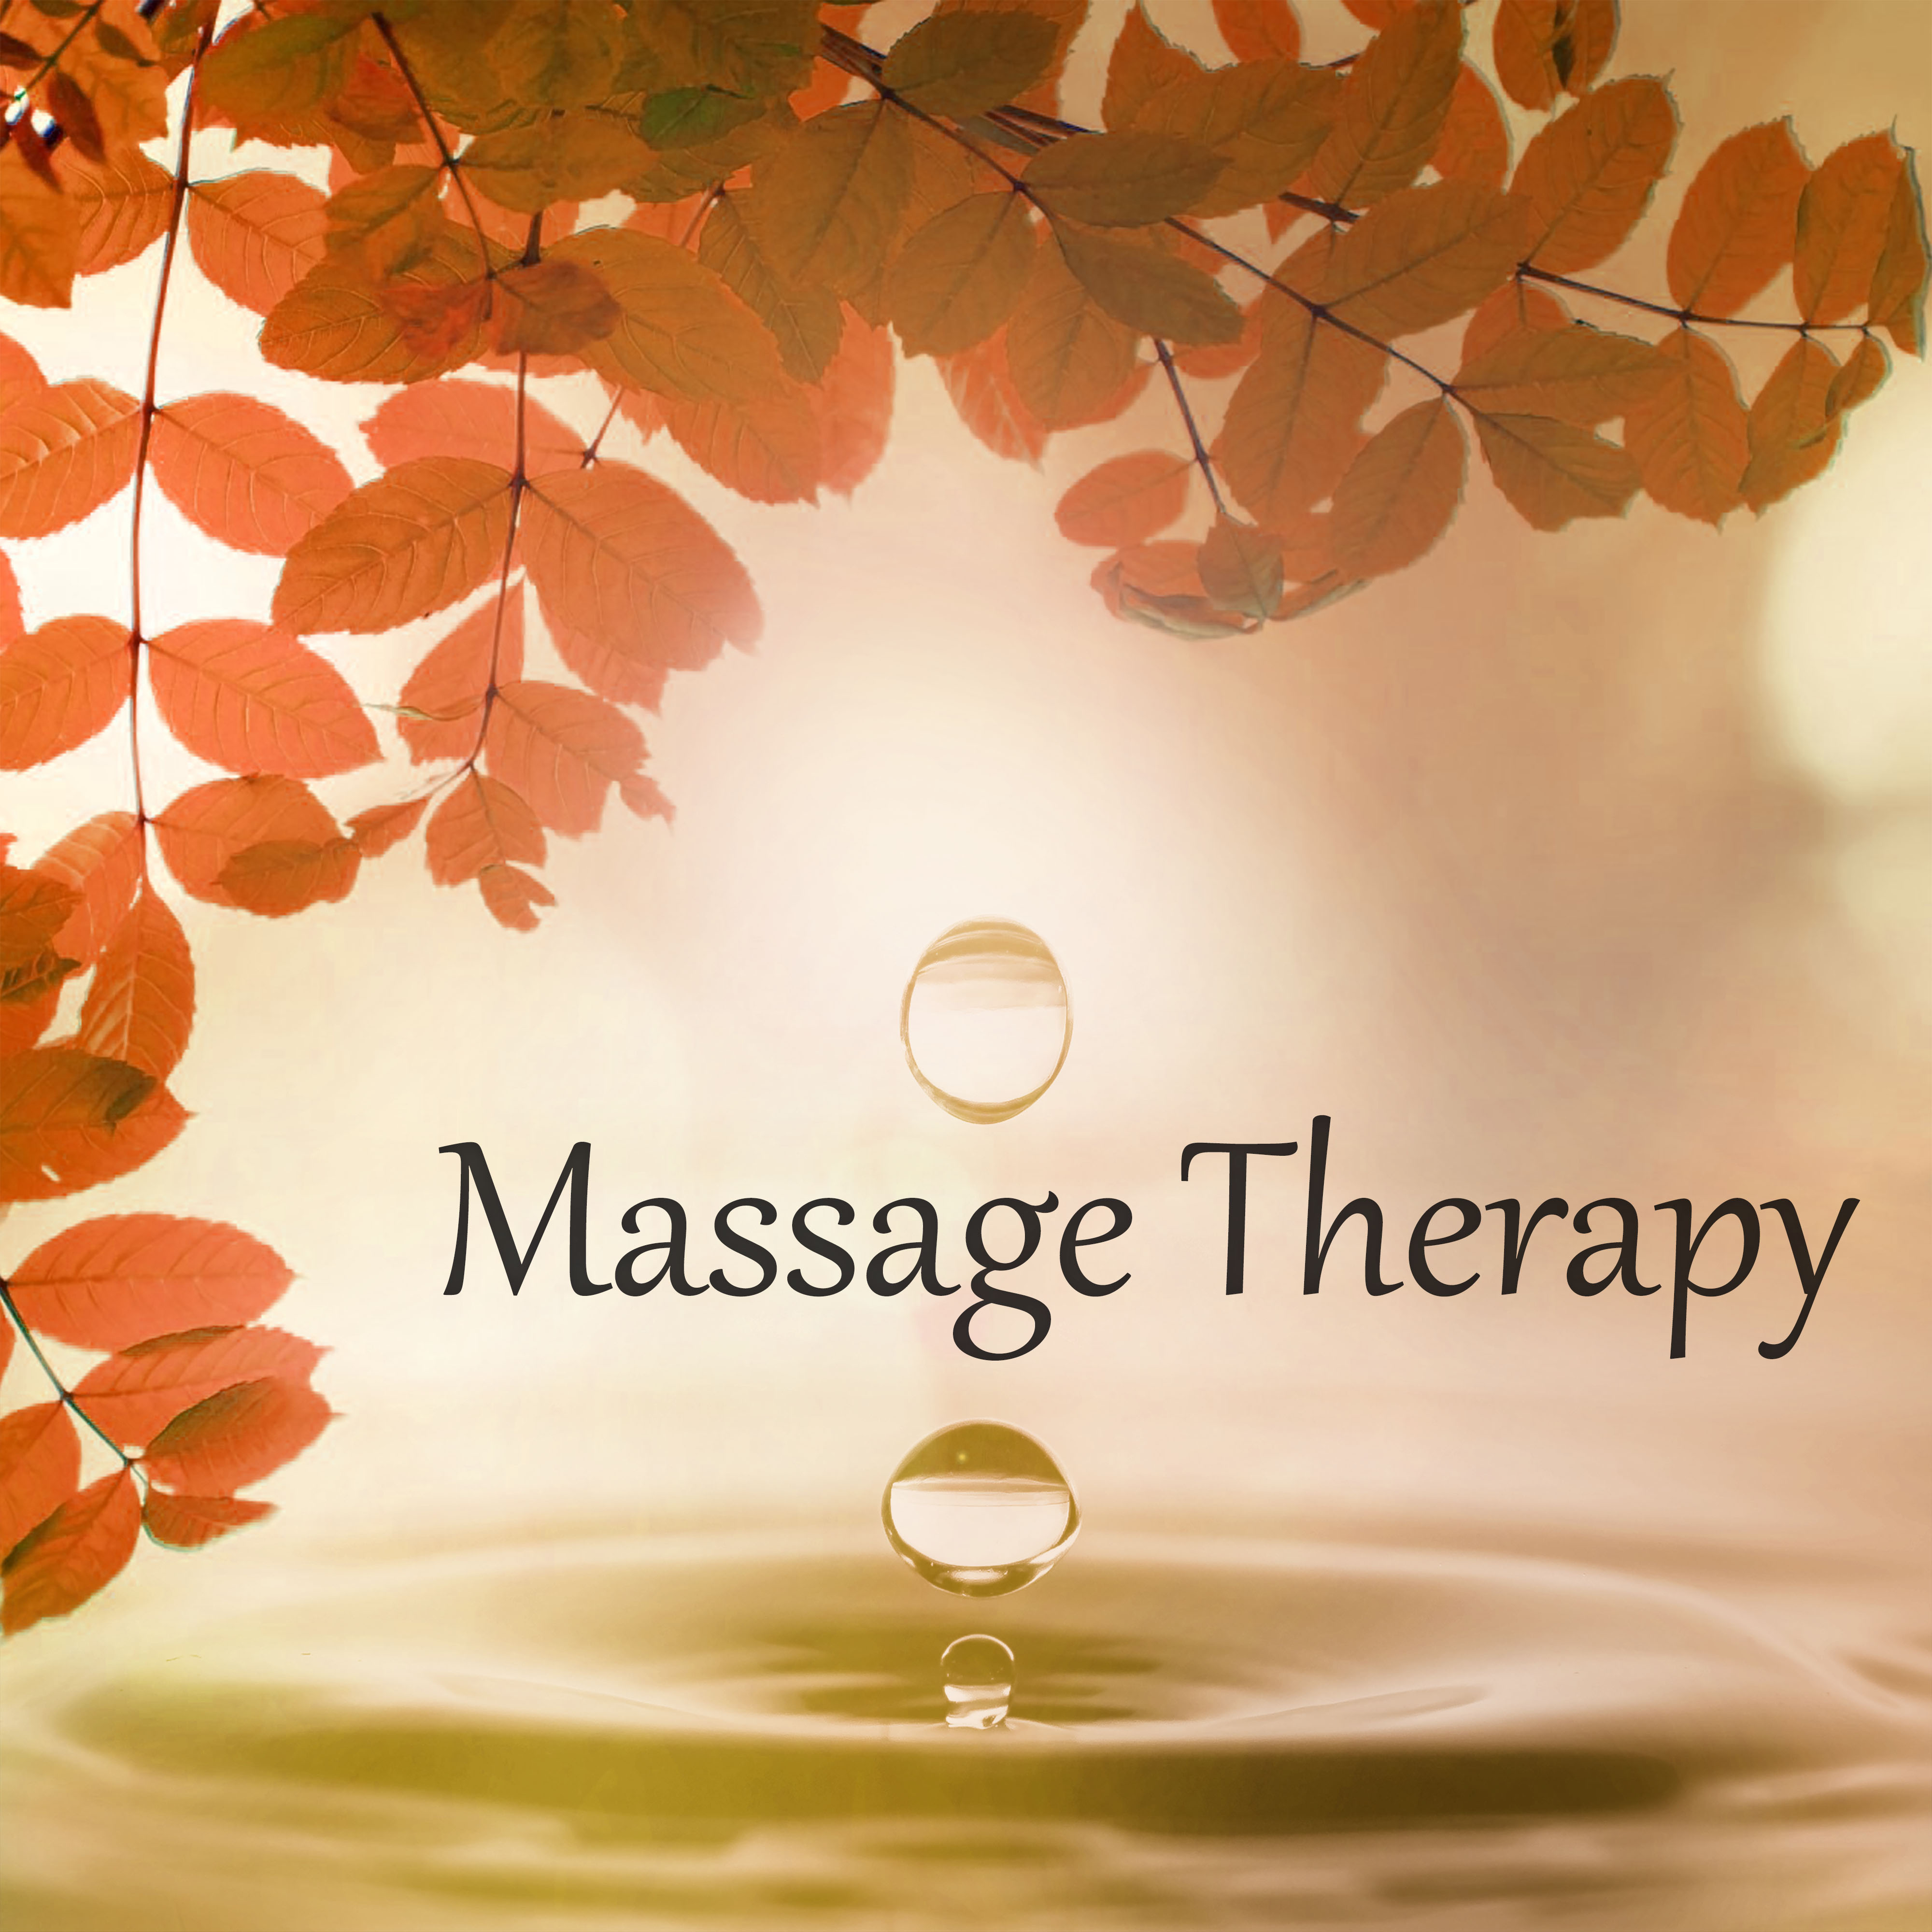 Massage Therapy  Spa Music, New Age Relaxation, Free Your Mind, Relieve Stress, Calming Sounds to Relax